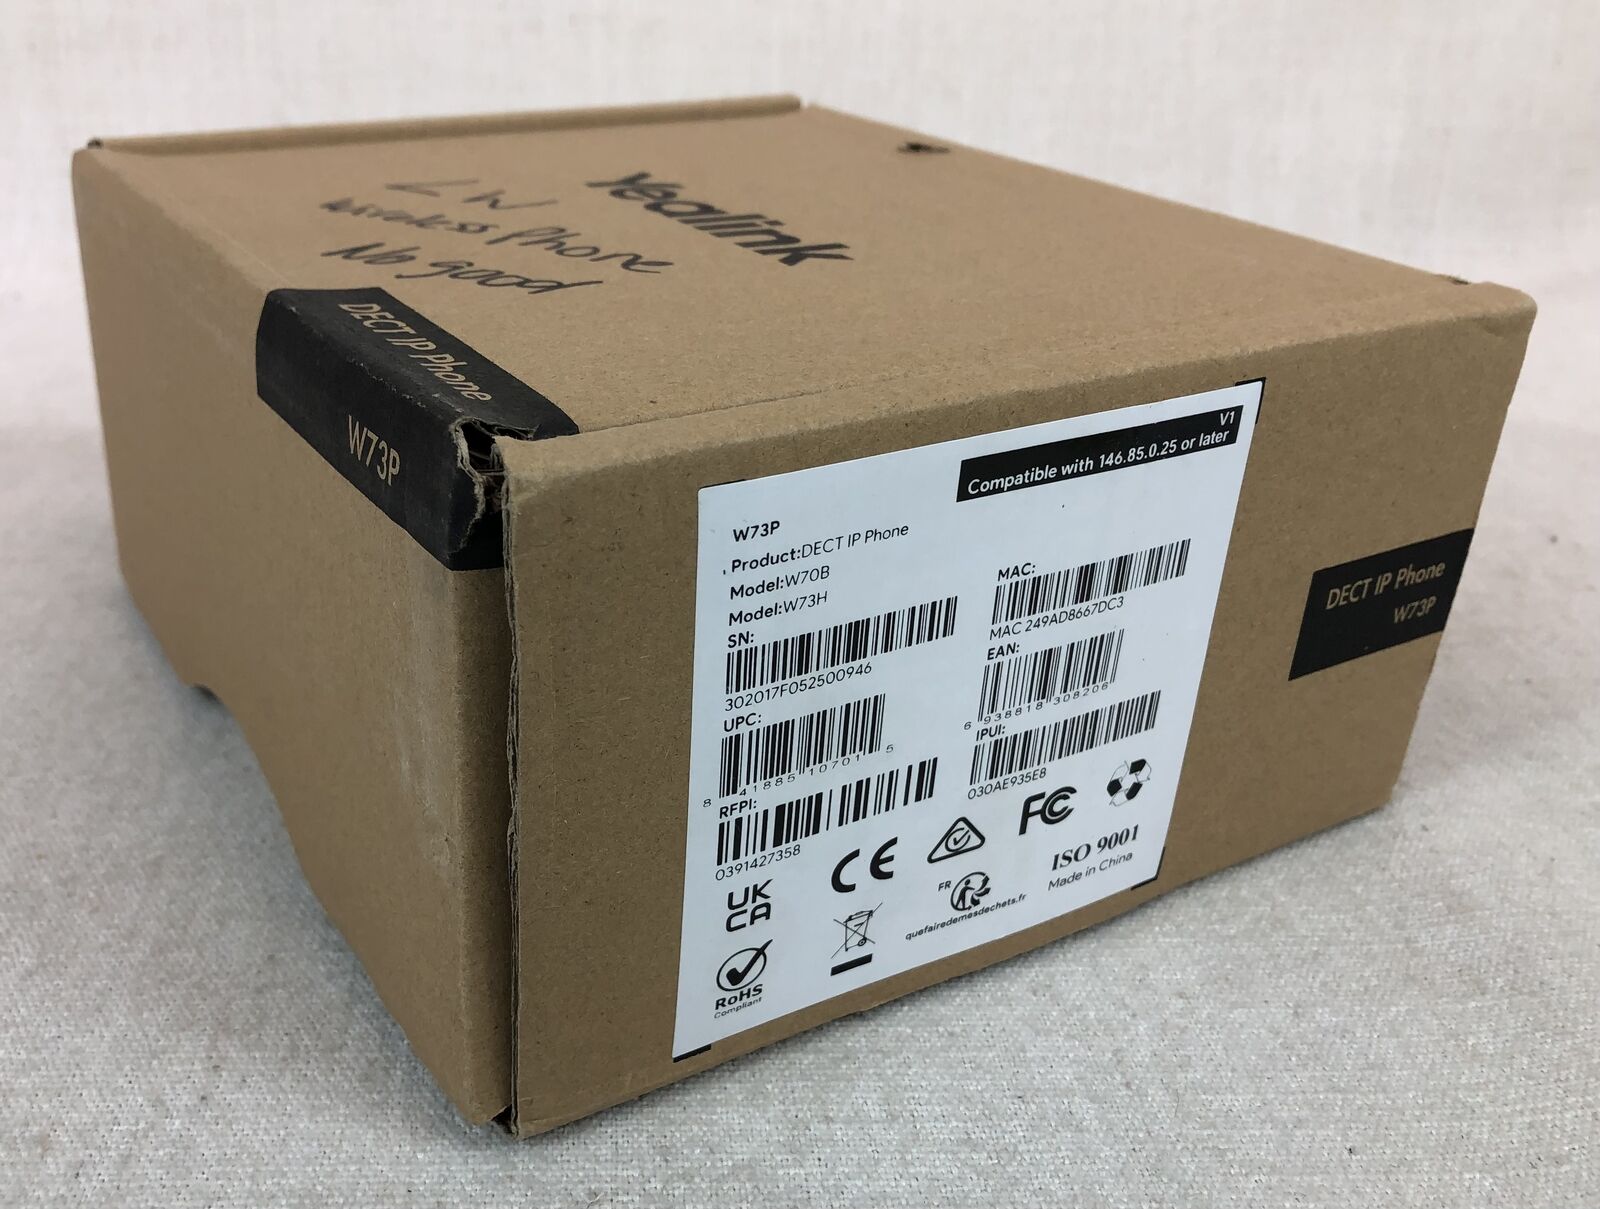 Yealink W73P DECT IP Phone, W70B & W73H, In Factory Box